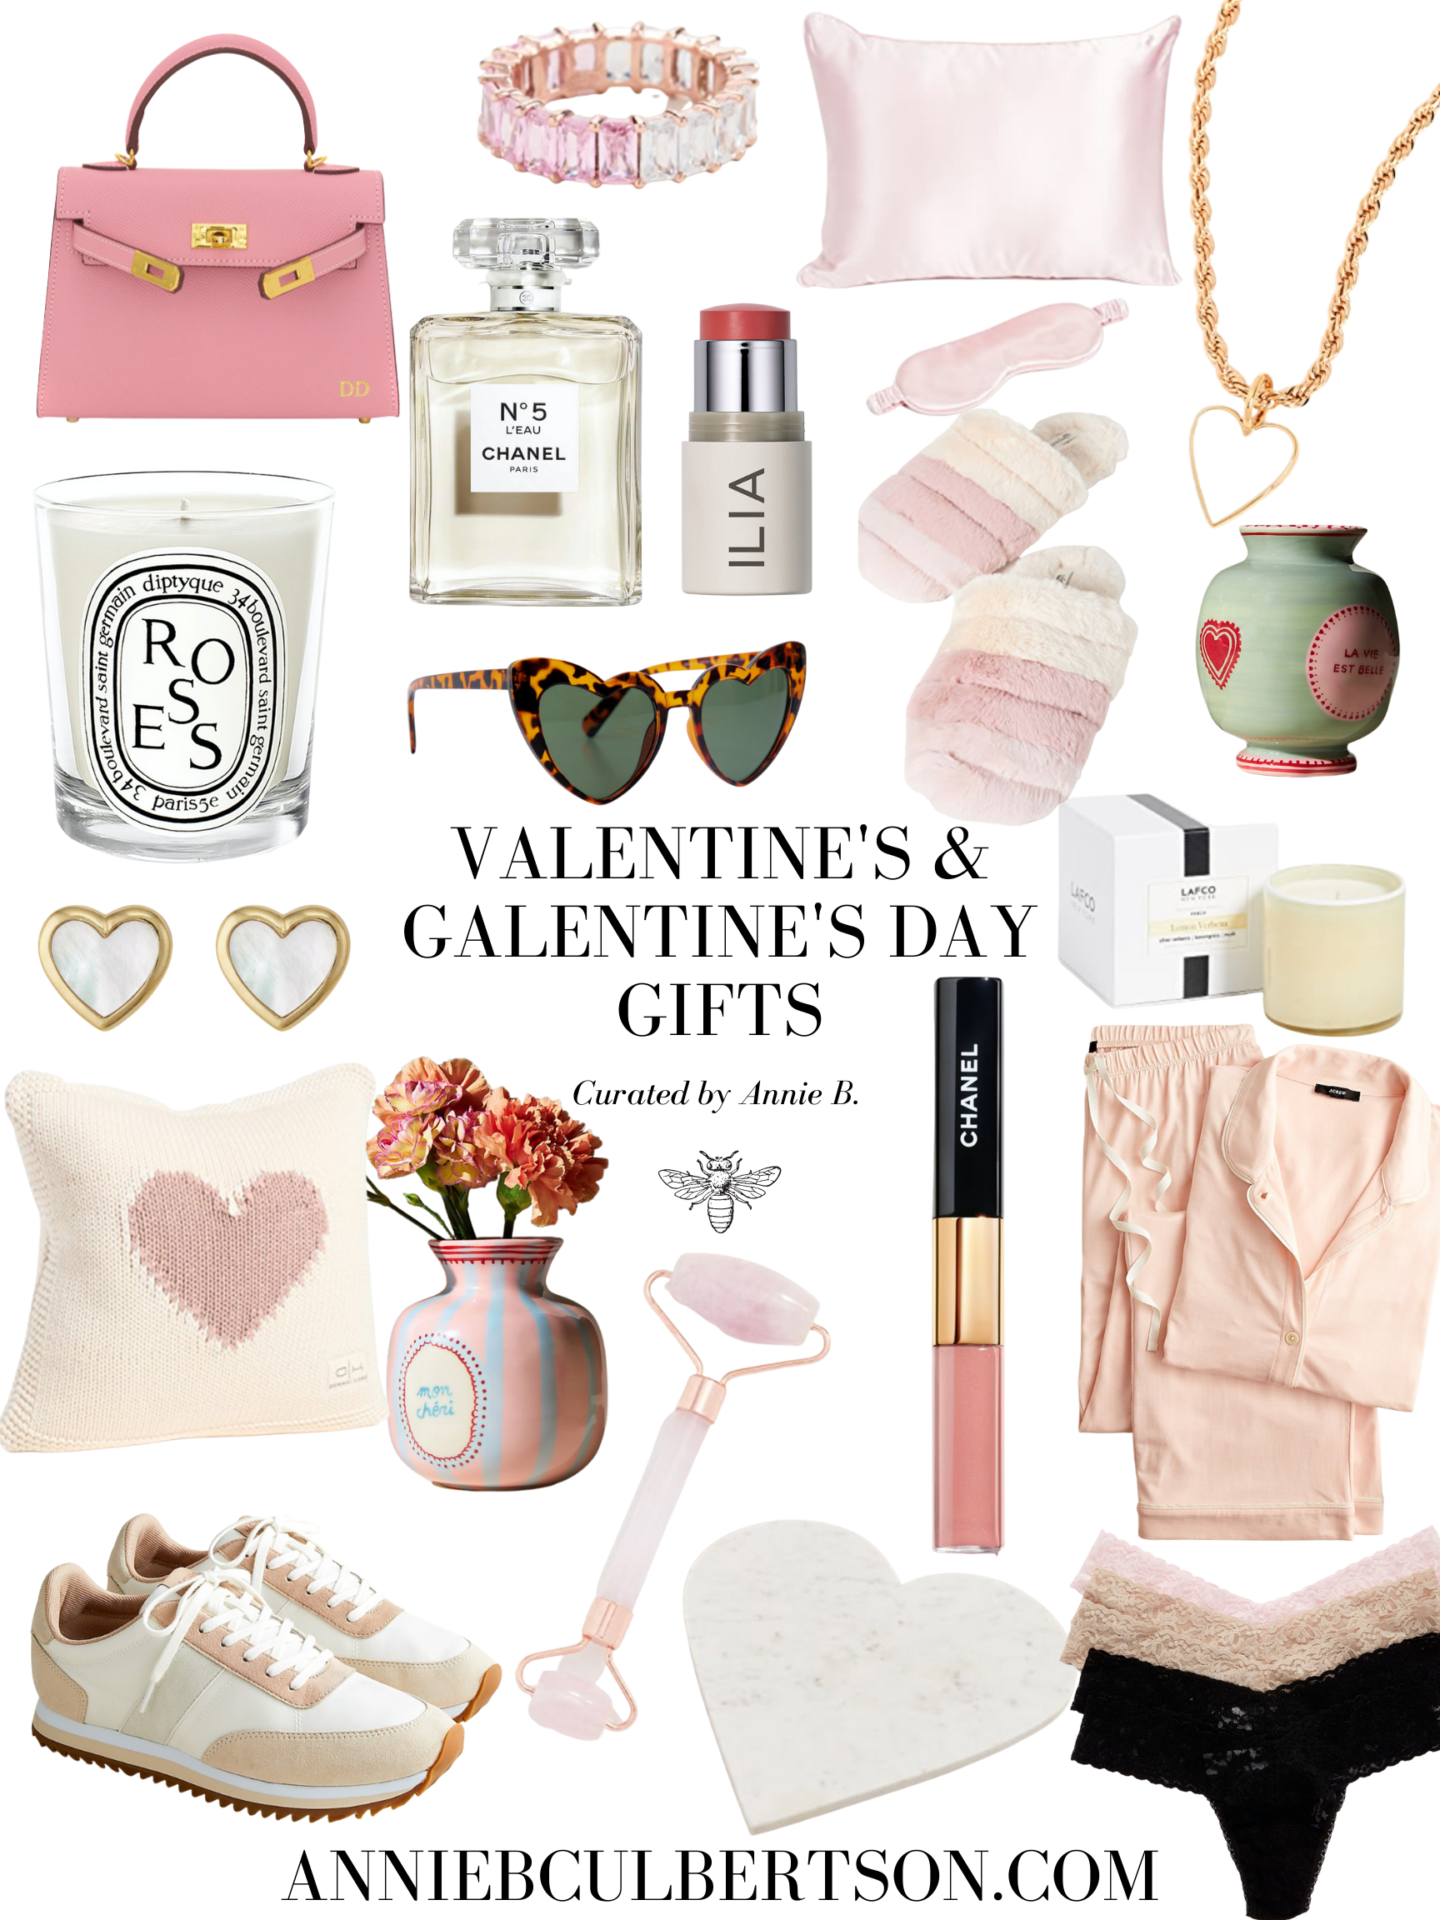 Valentine’s and Galentine’s Day Gifts